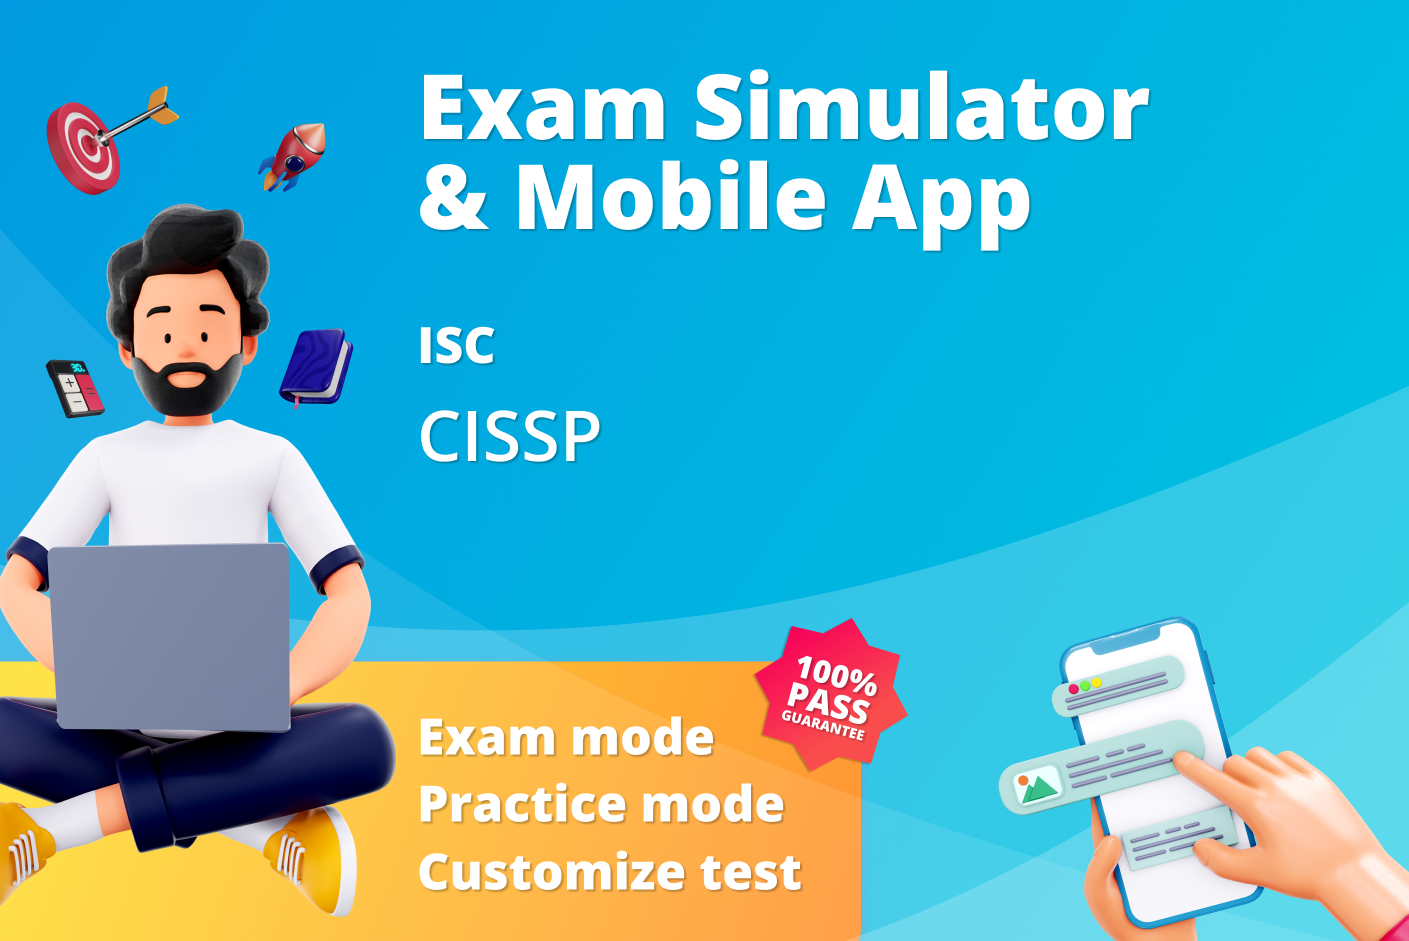 This image is related to CISSP Certification Practice test